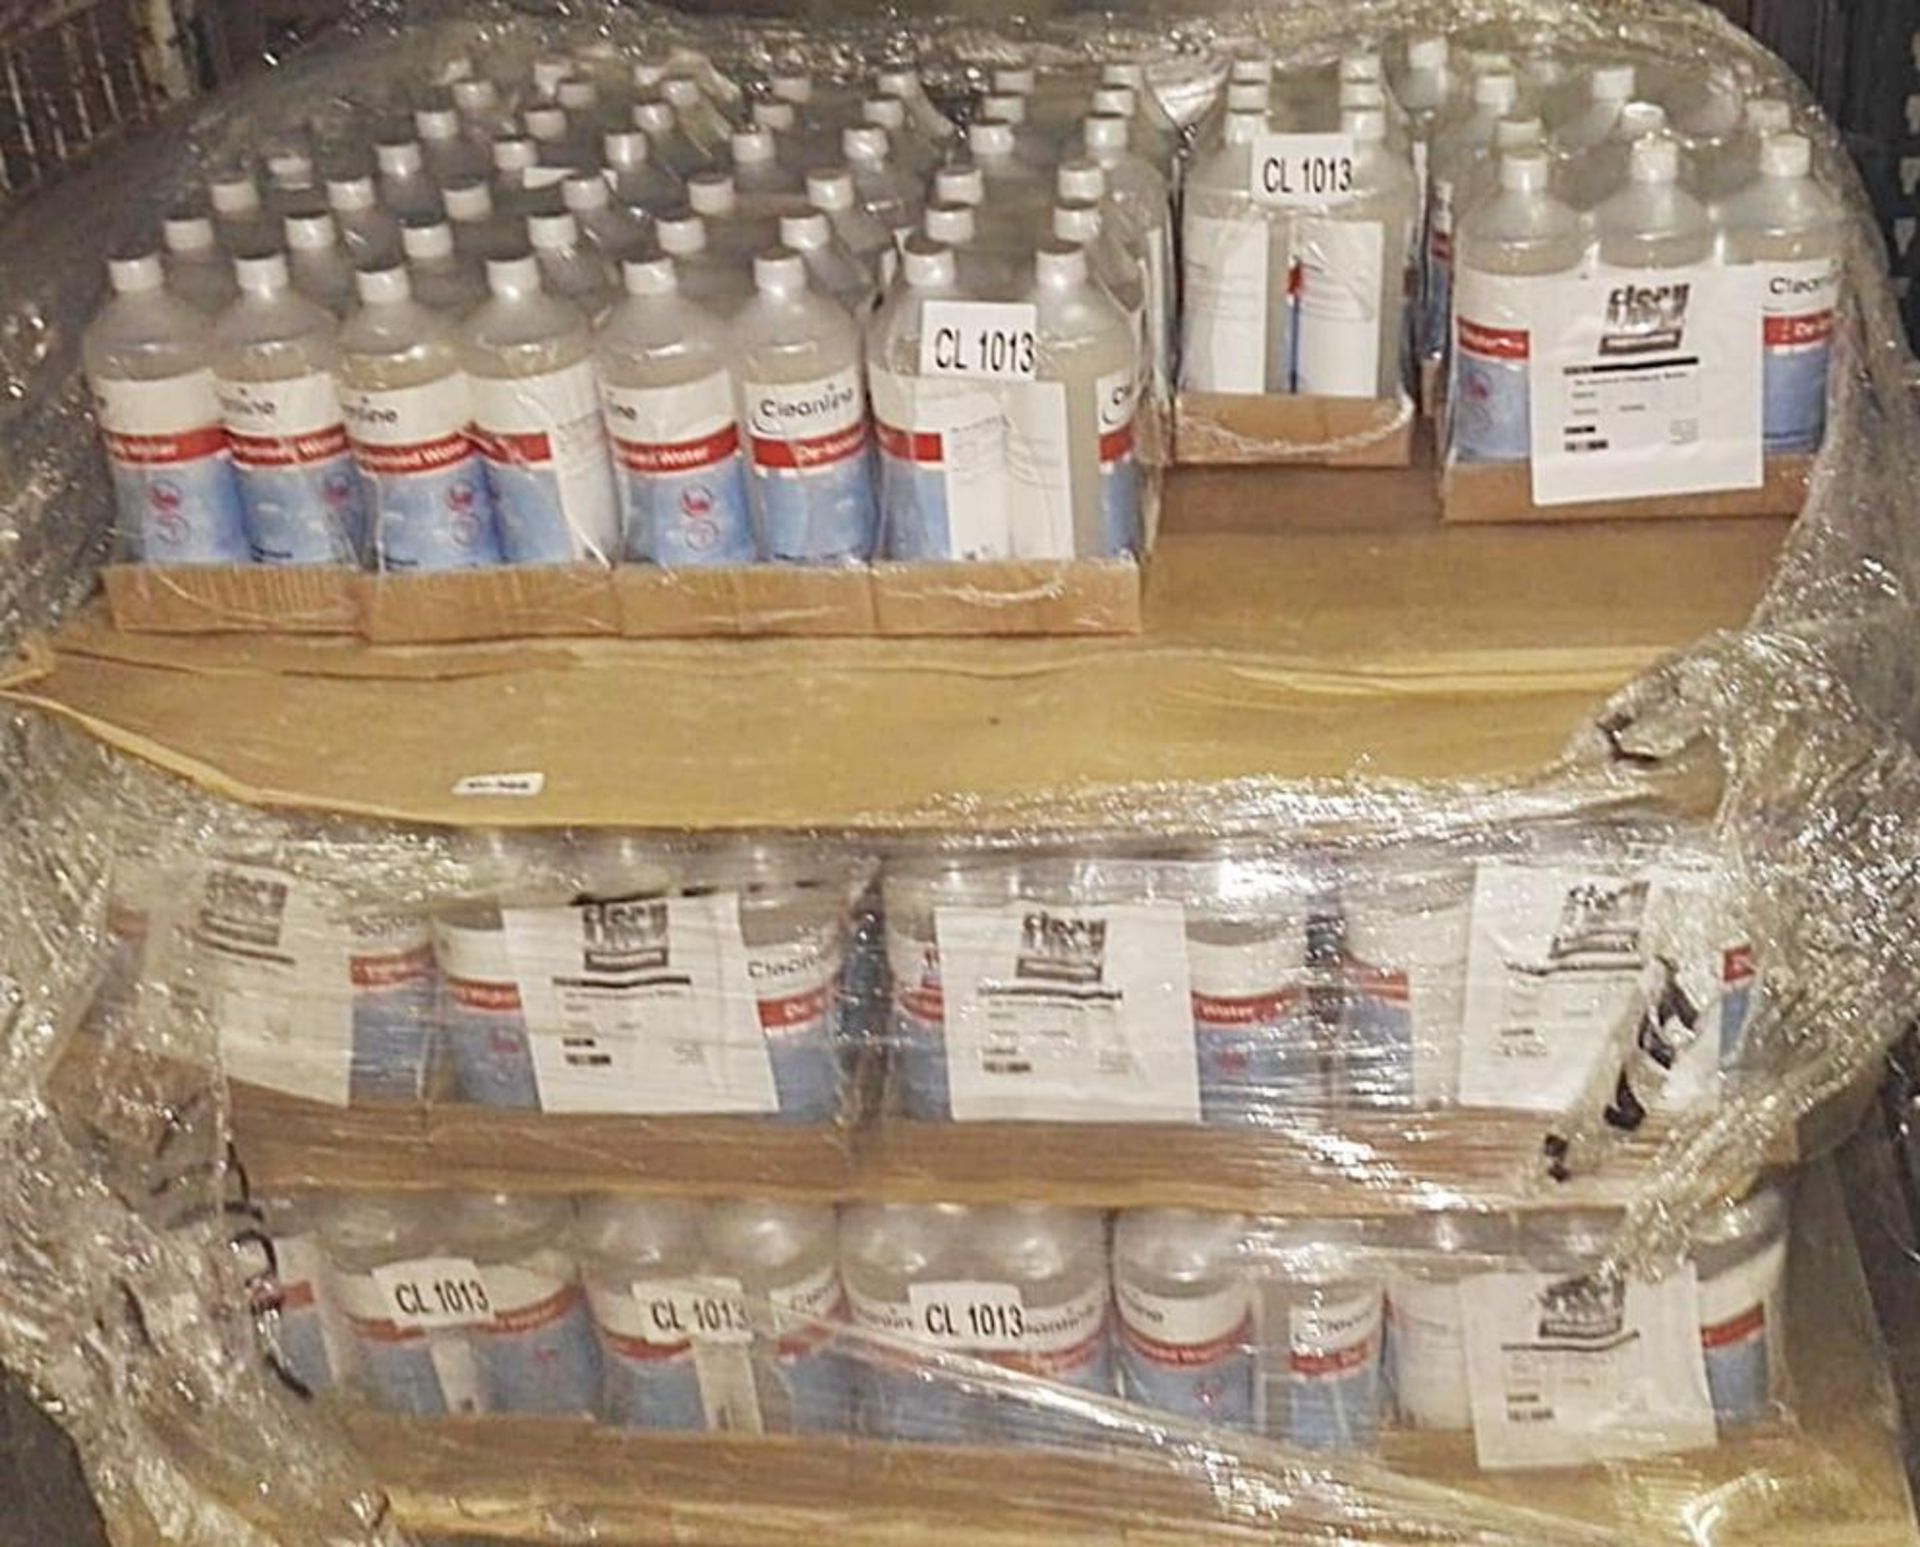 Pallet Job Lot Of Clean Line Professional De-Ionised (Distilled) Water - Ref: Ma368 - Contains Appro